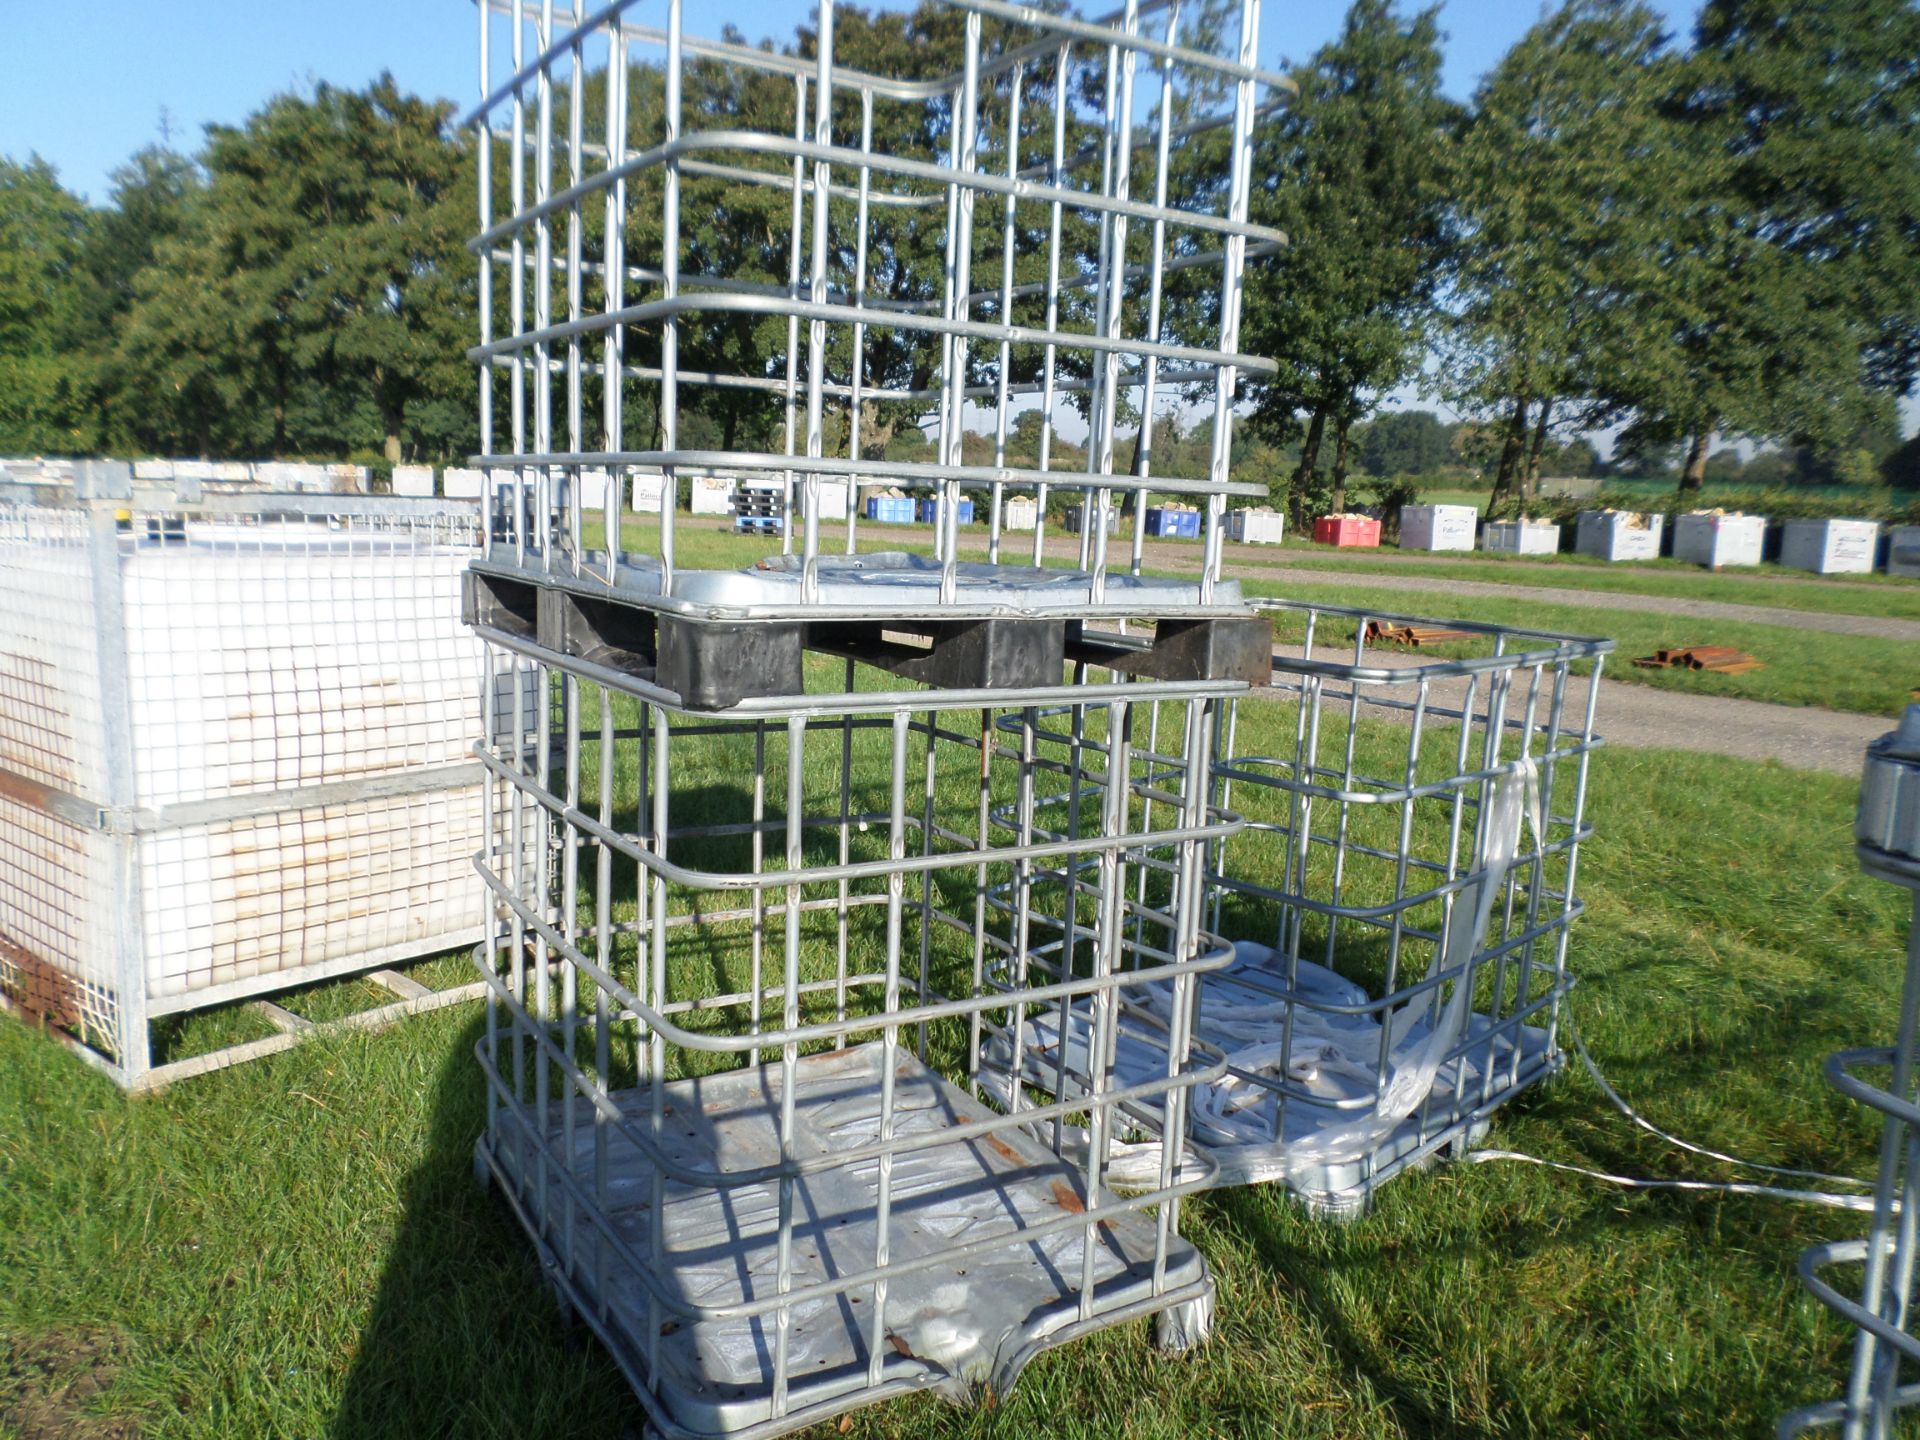 3 x IBC cages